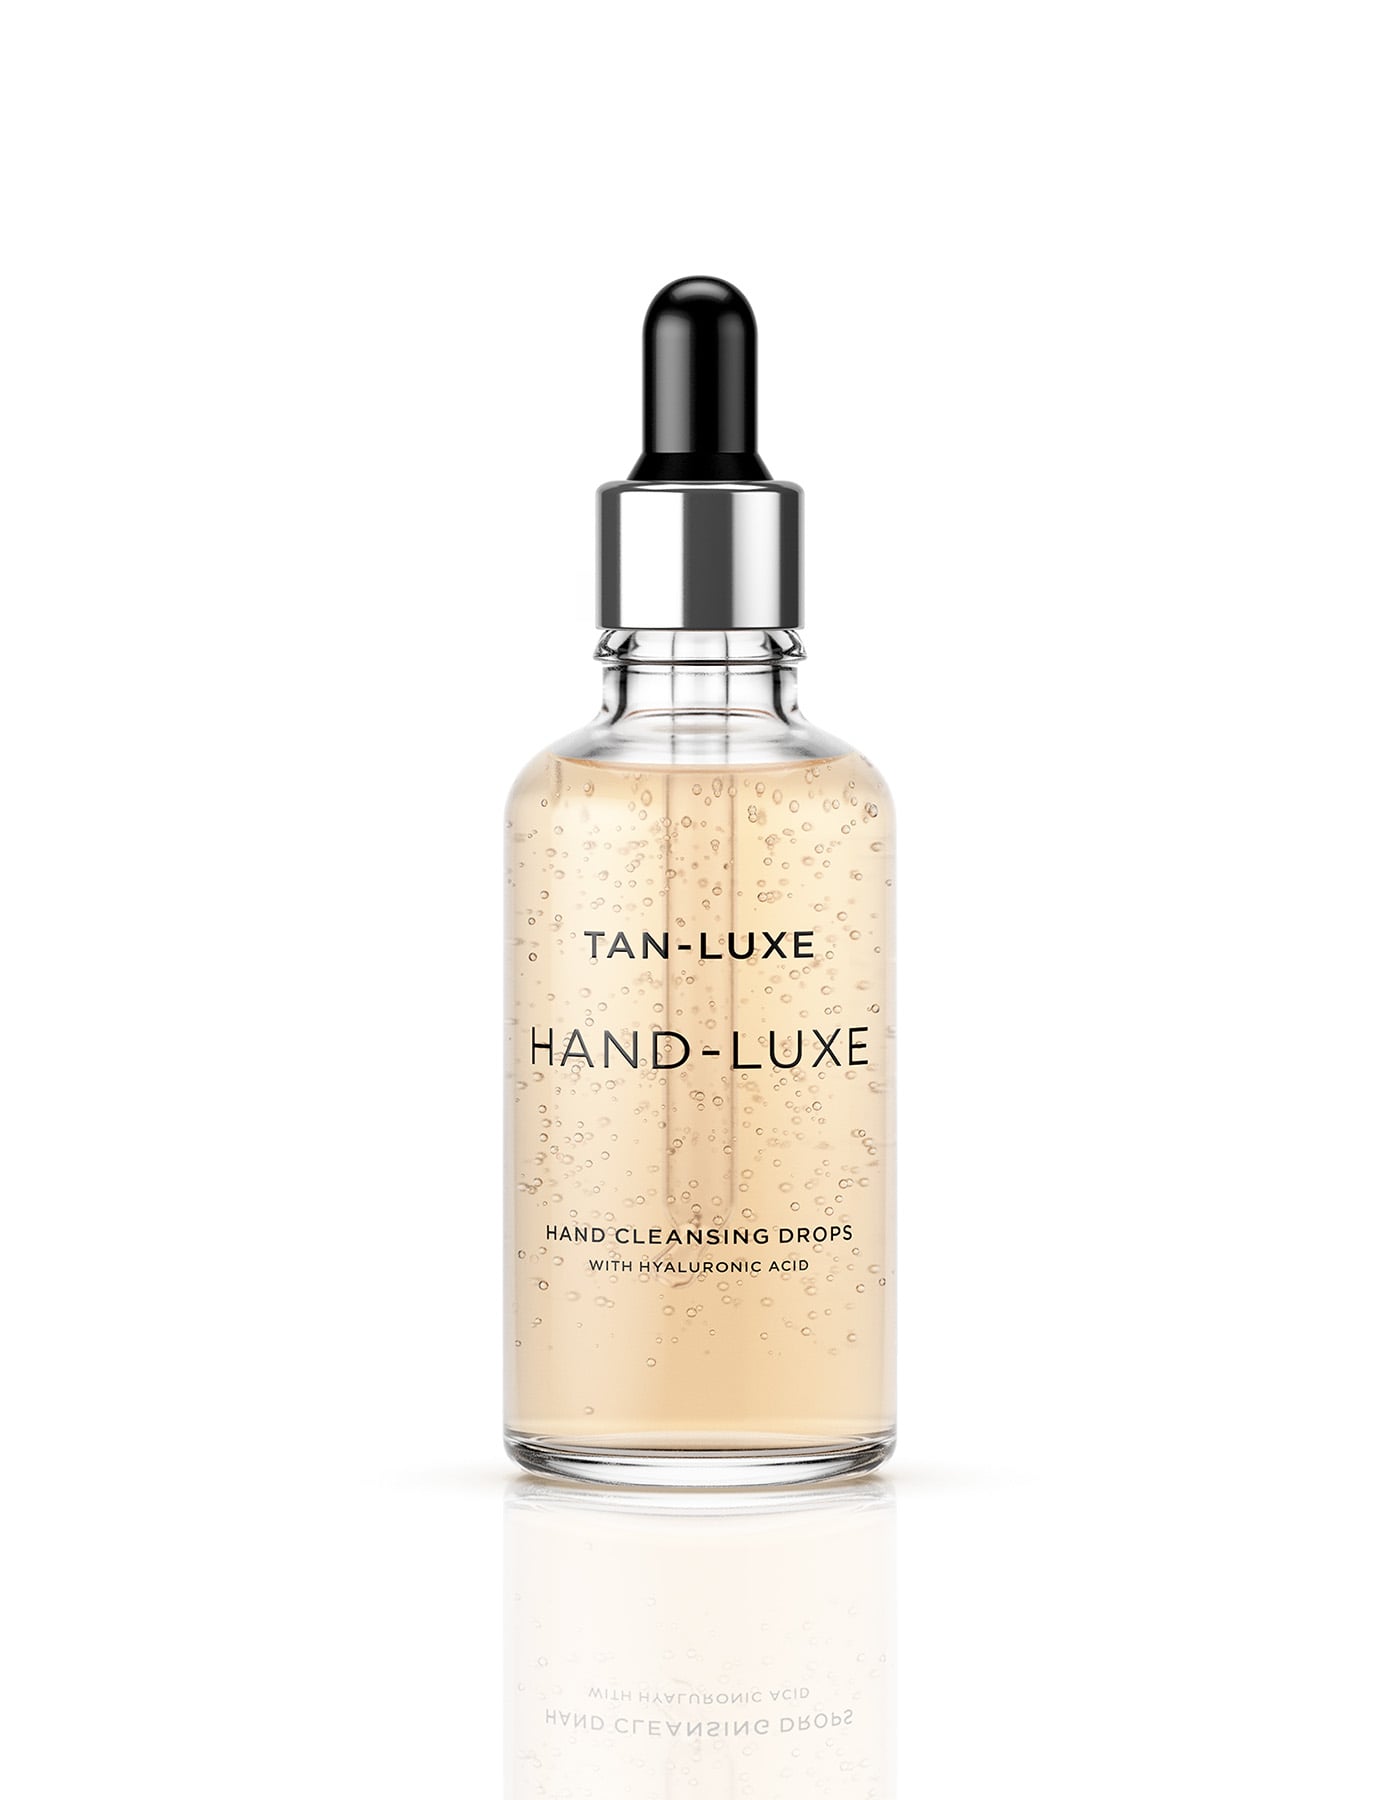 LVMH CONVERTS PERFUME FACTORIES TO CREATE HAND SANITIZER + FAVORITE LVMH  PERFUMES, BRANDS 